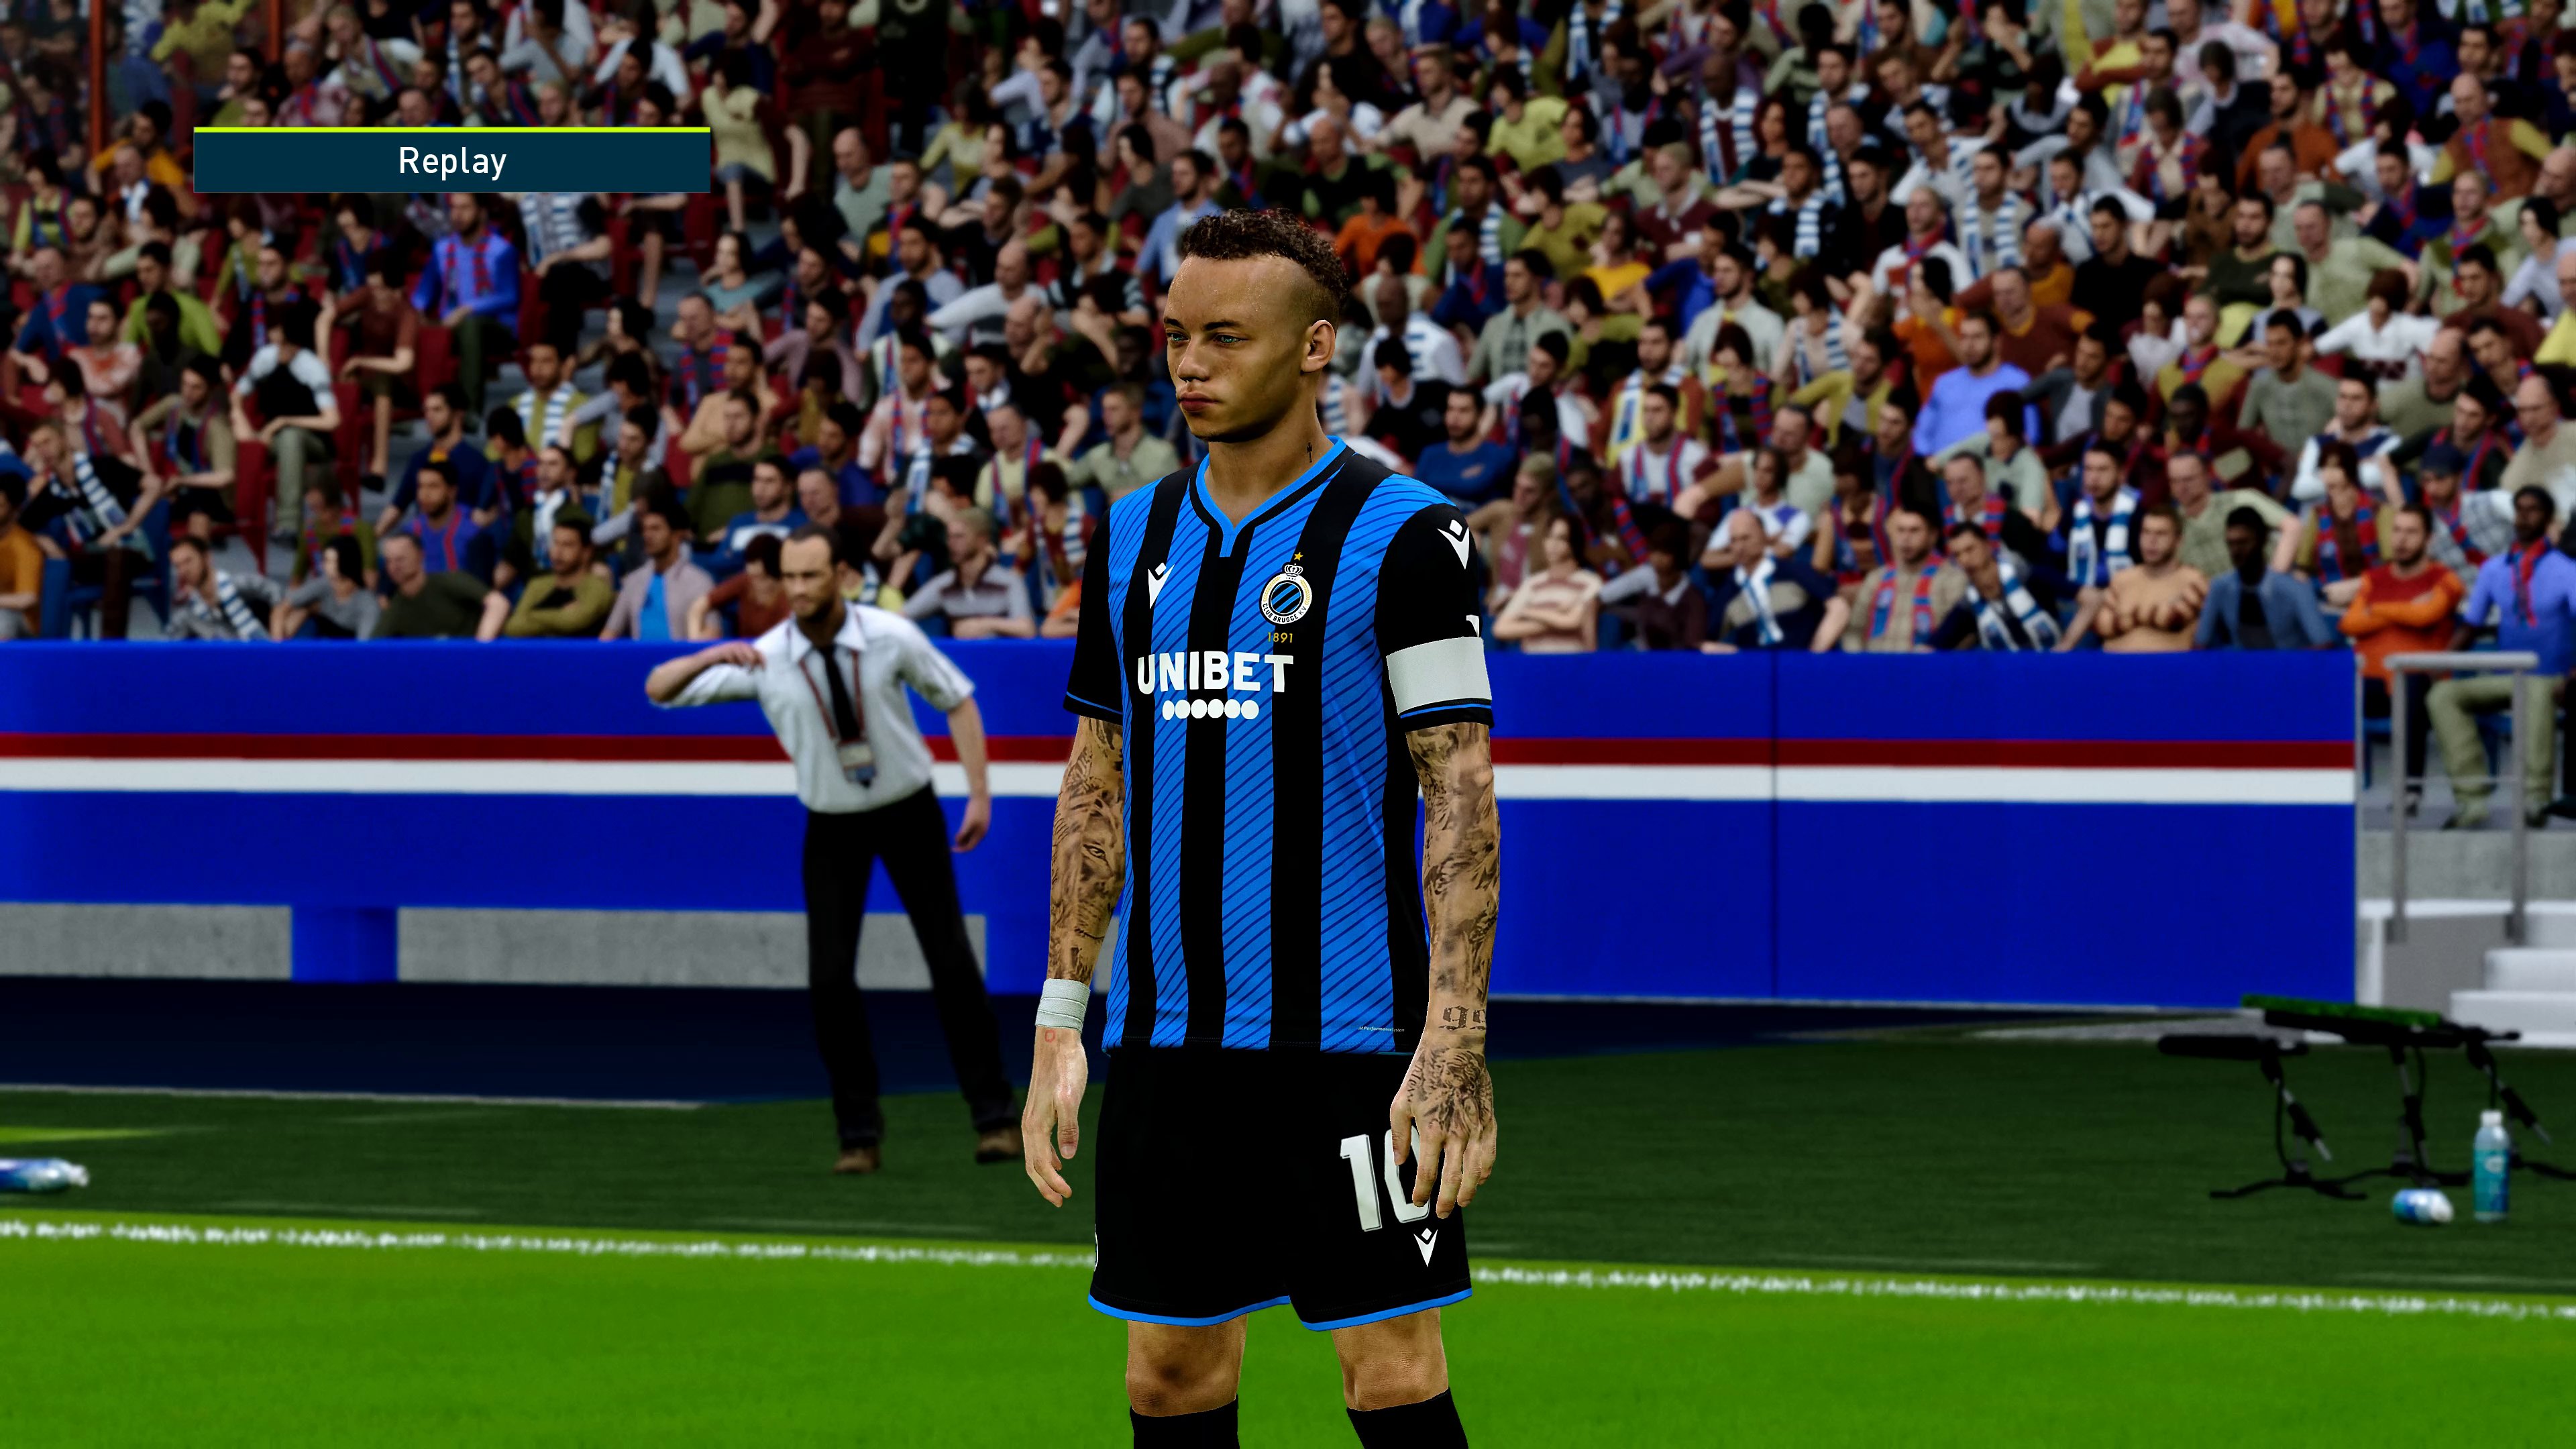 PES 2021 - NEW FACE AND TATTOOS NOA LANG CLUB DE BRUGGE By